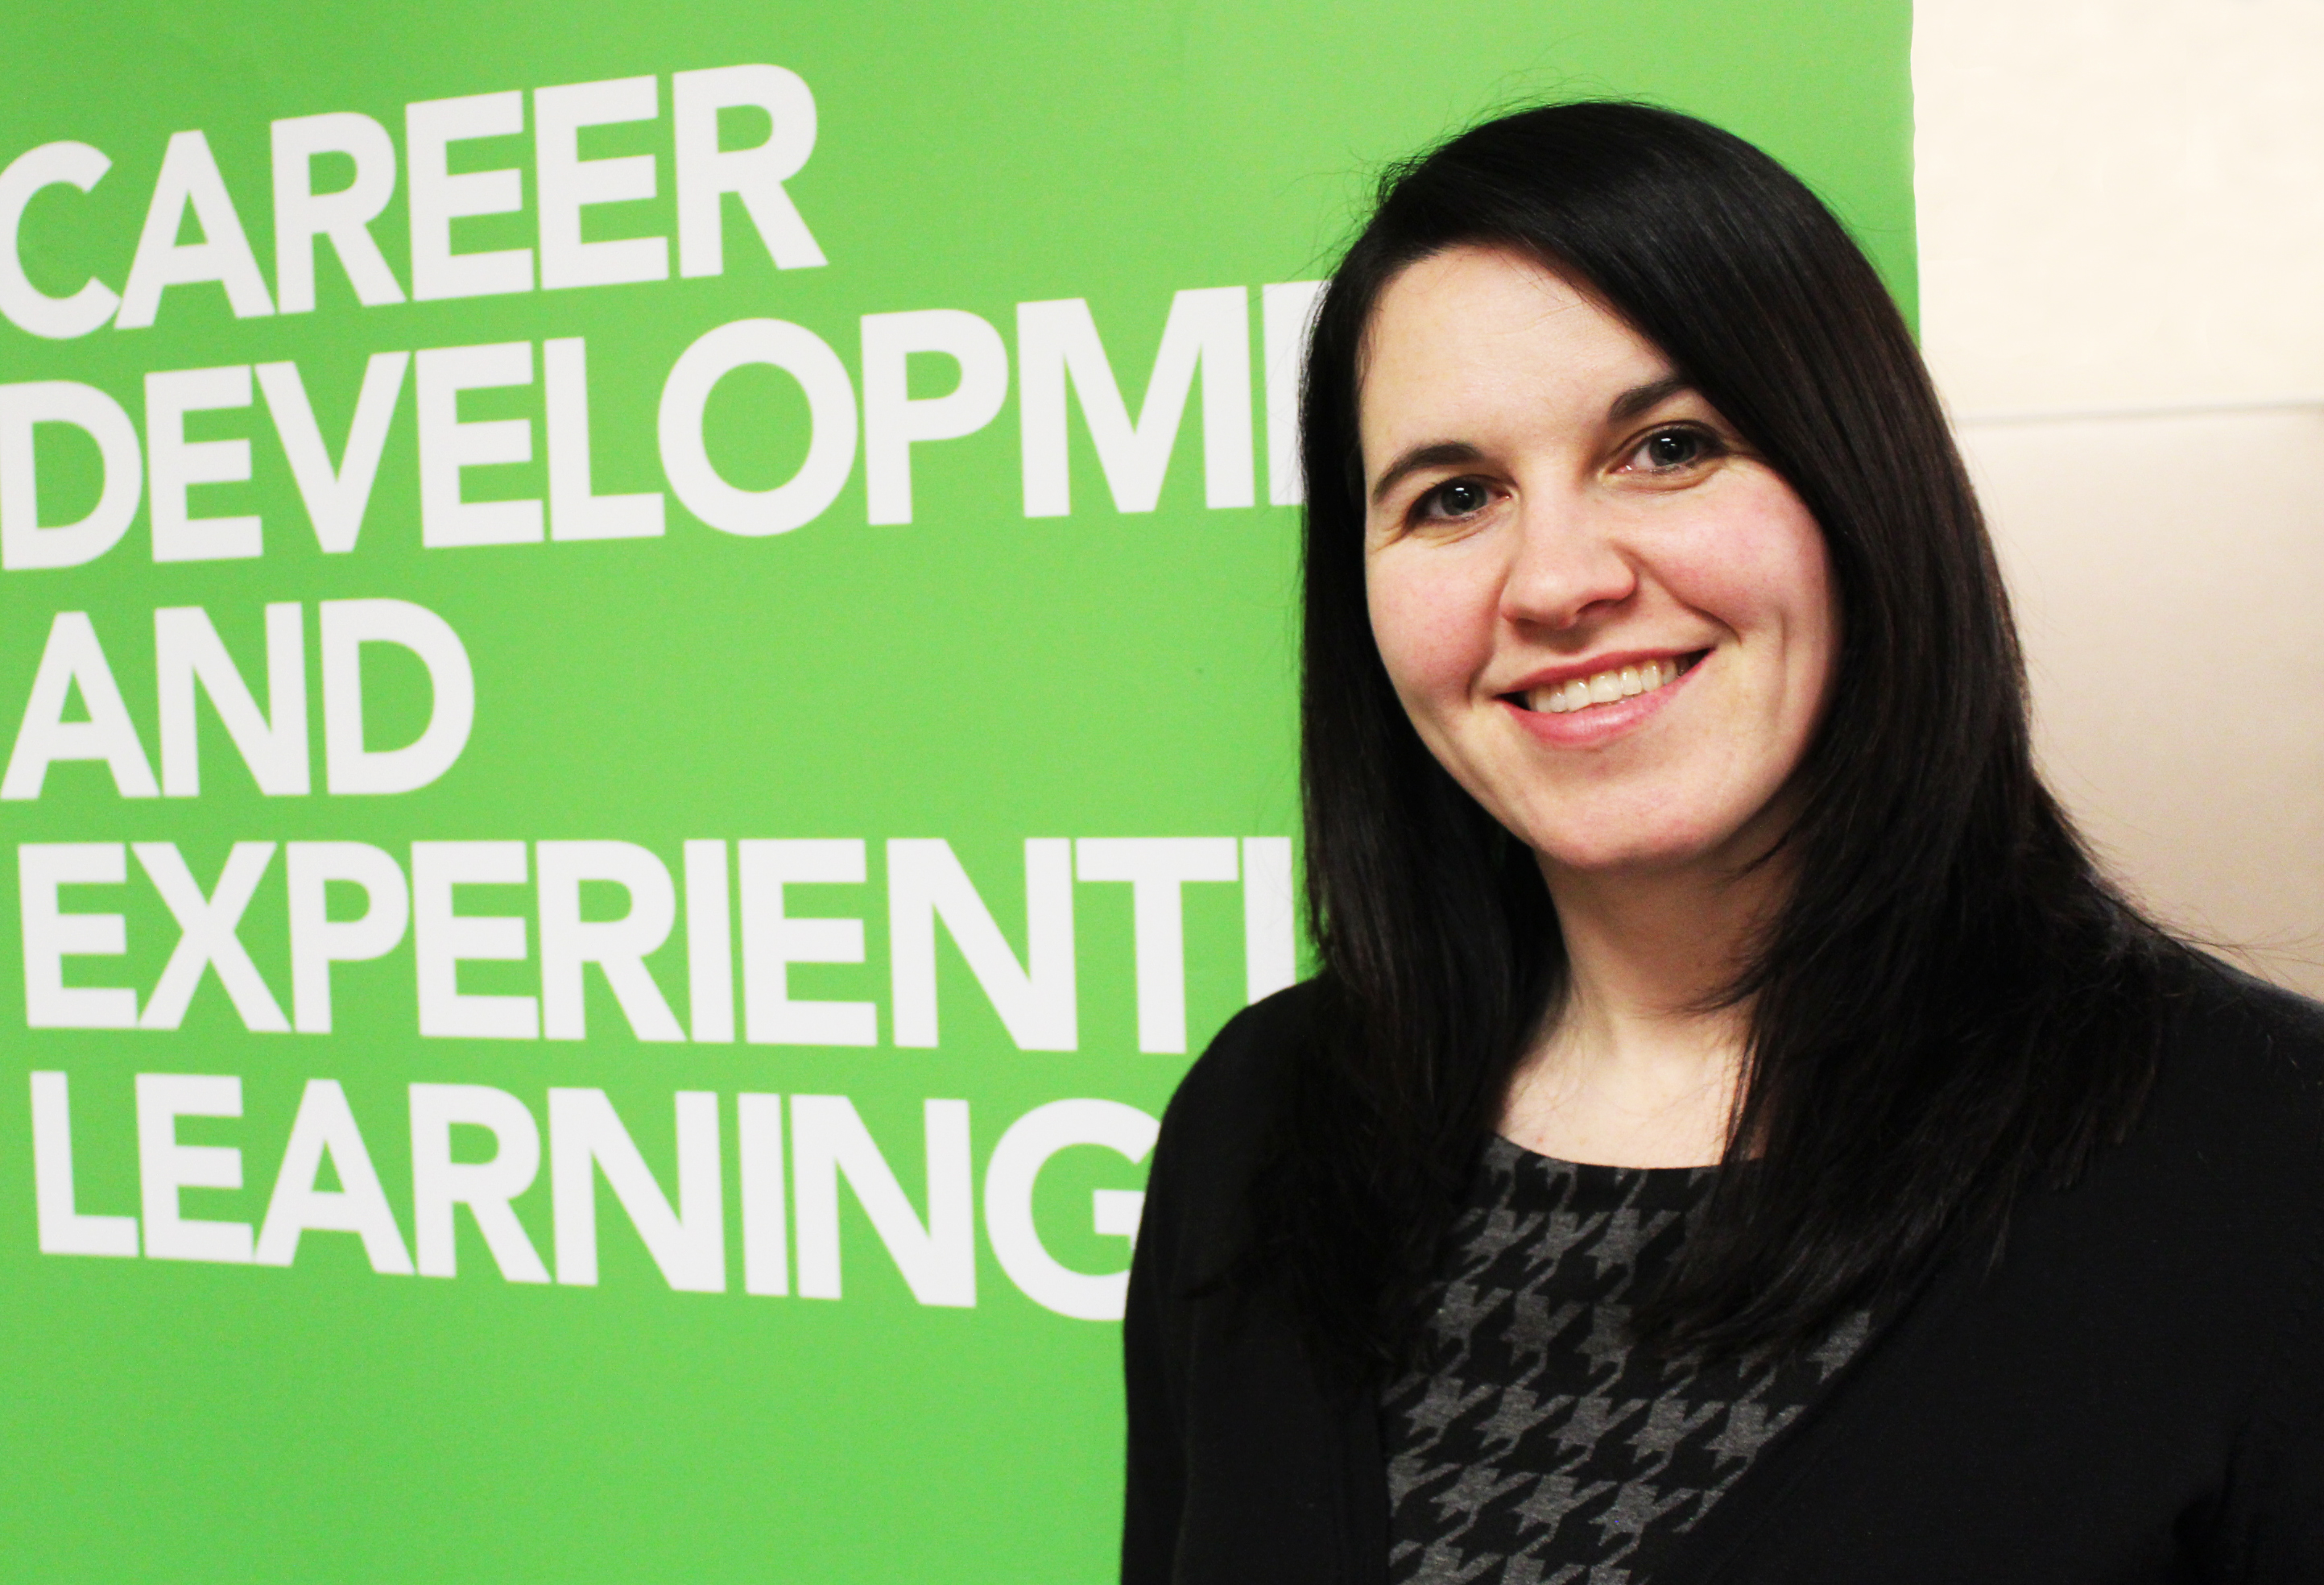 Jennifer Browne, director, Career Development and Experiential Learning